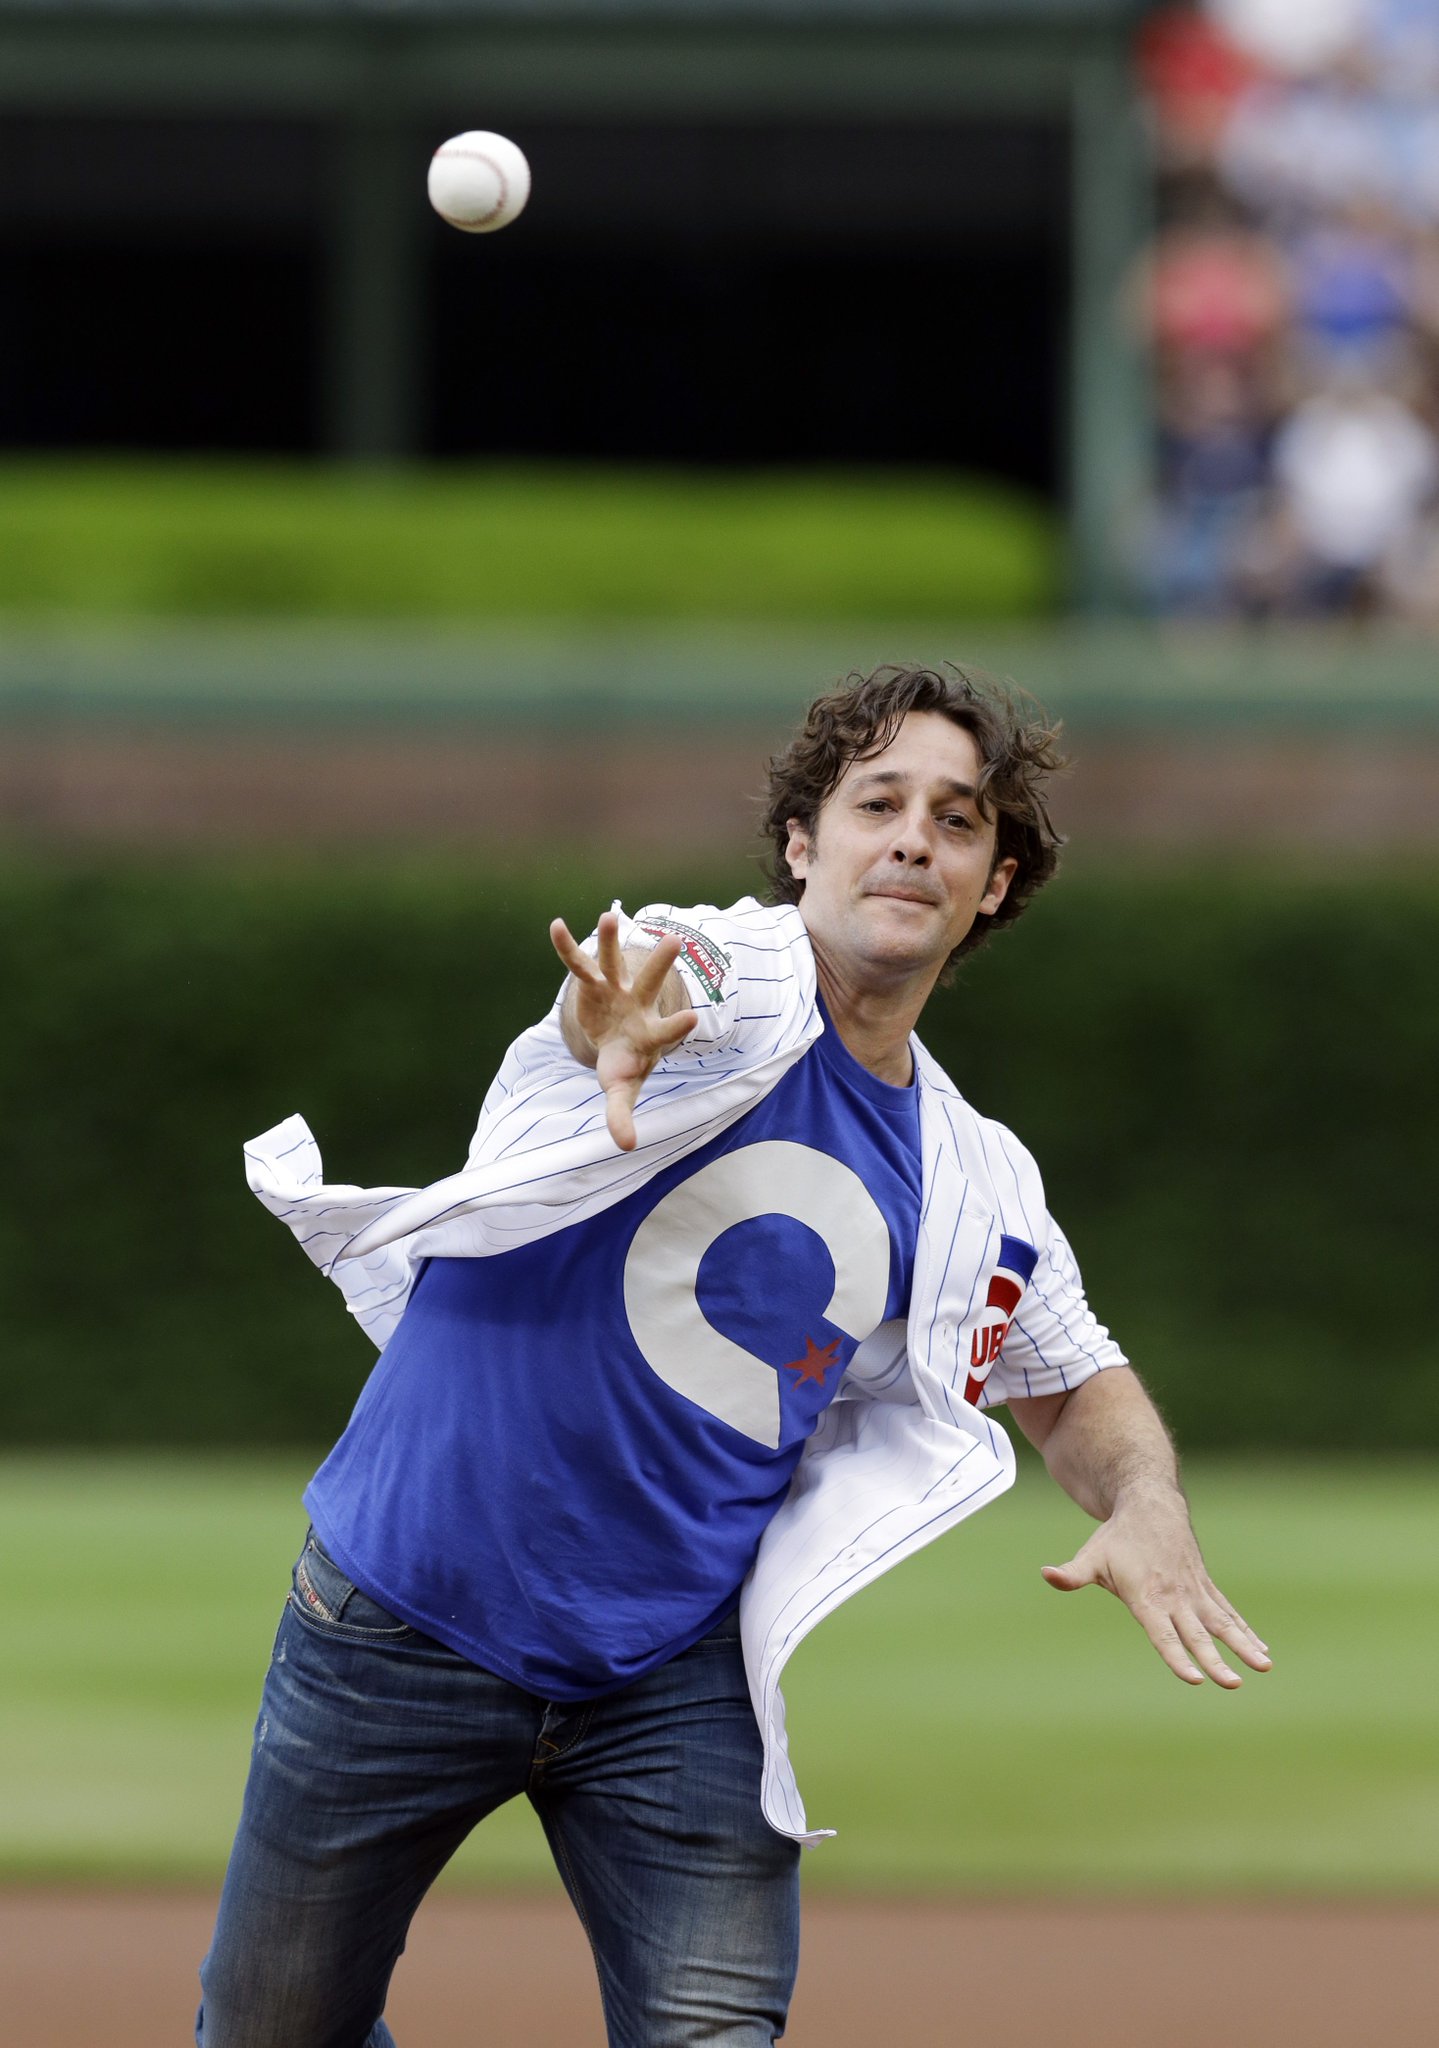 Henry Rowengartner was at Wrigley Field rooting for Cubs during NLCS Game 4